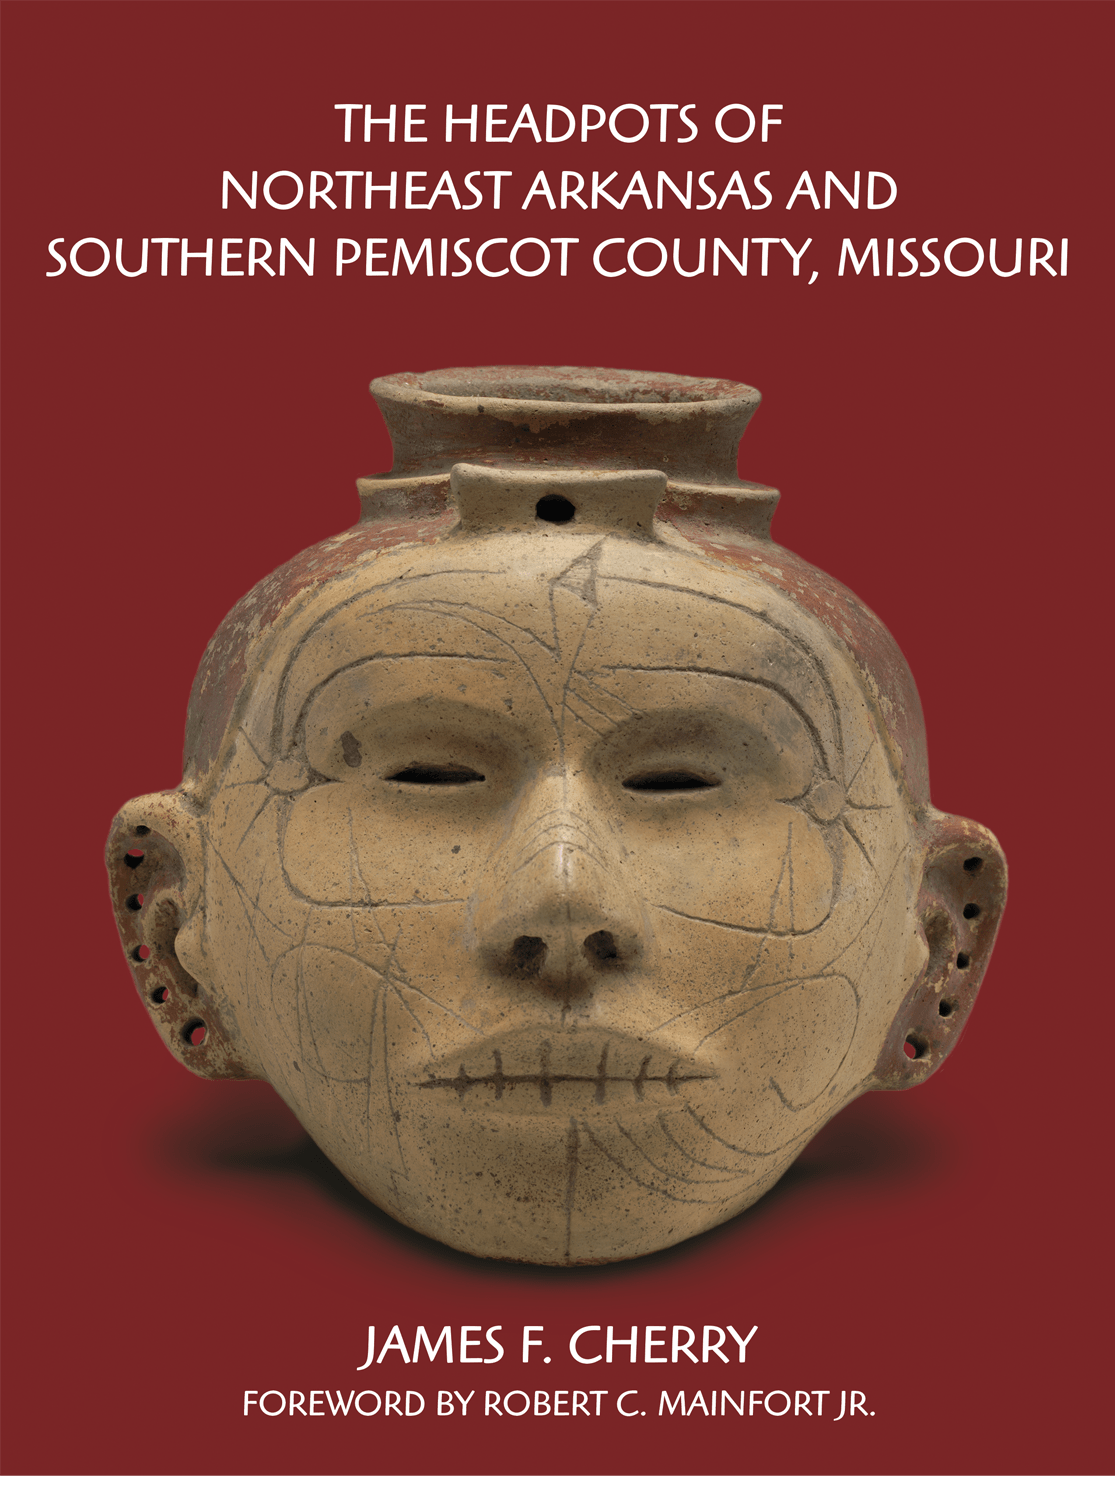 "The Headpots of Northeast Arkansas and Southern Pemiscot County, Missouri"